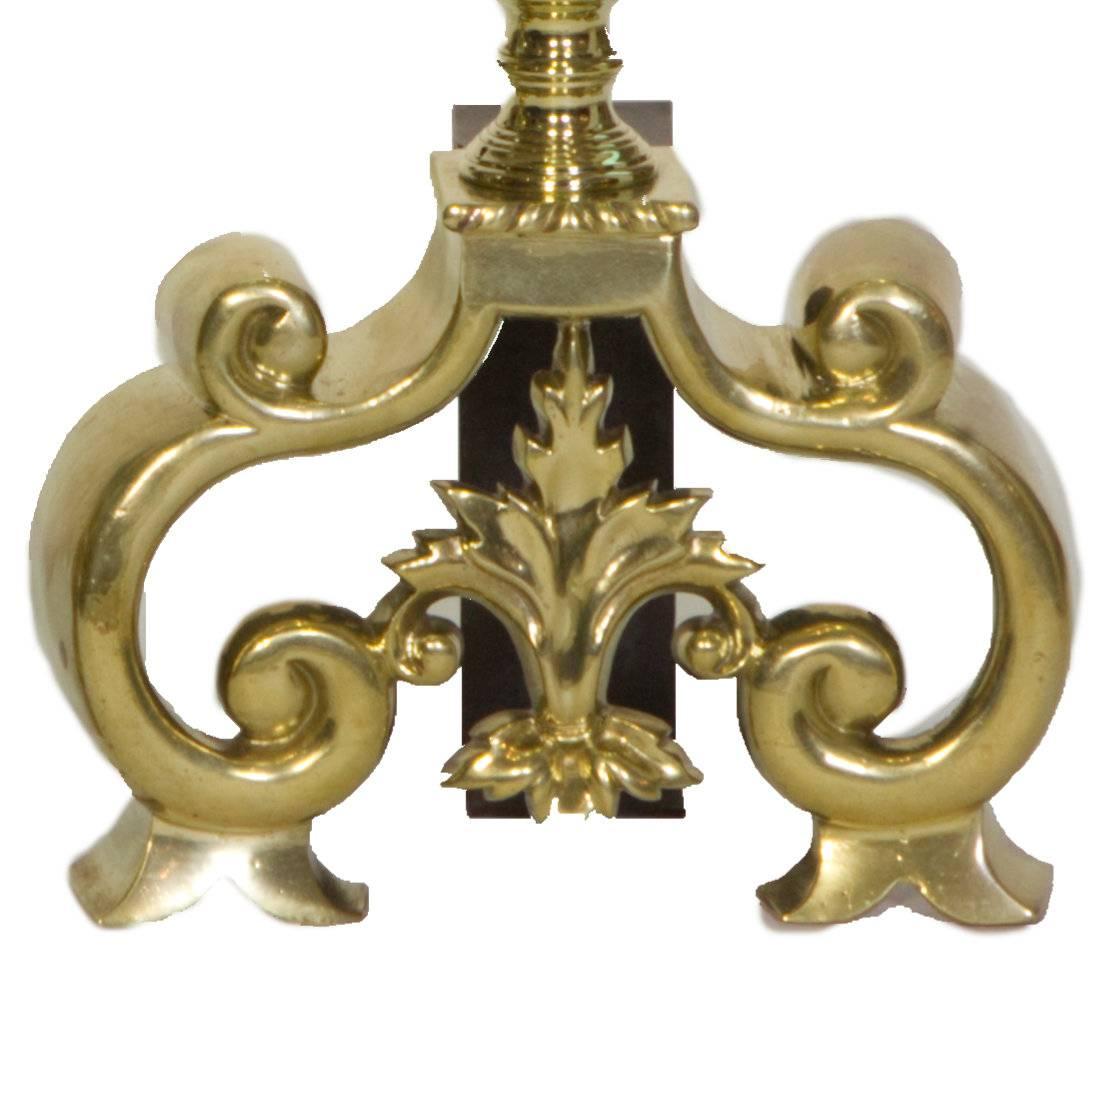 Pair of antique detailed cast brass andirons, fire dogs.
With pierced globes and flame-burst finials.

Measures: Height 18